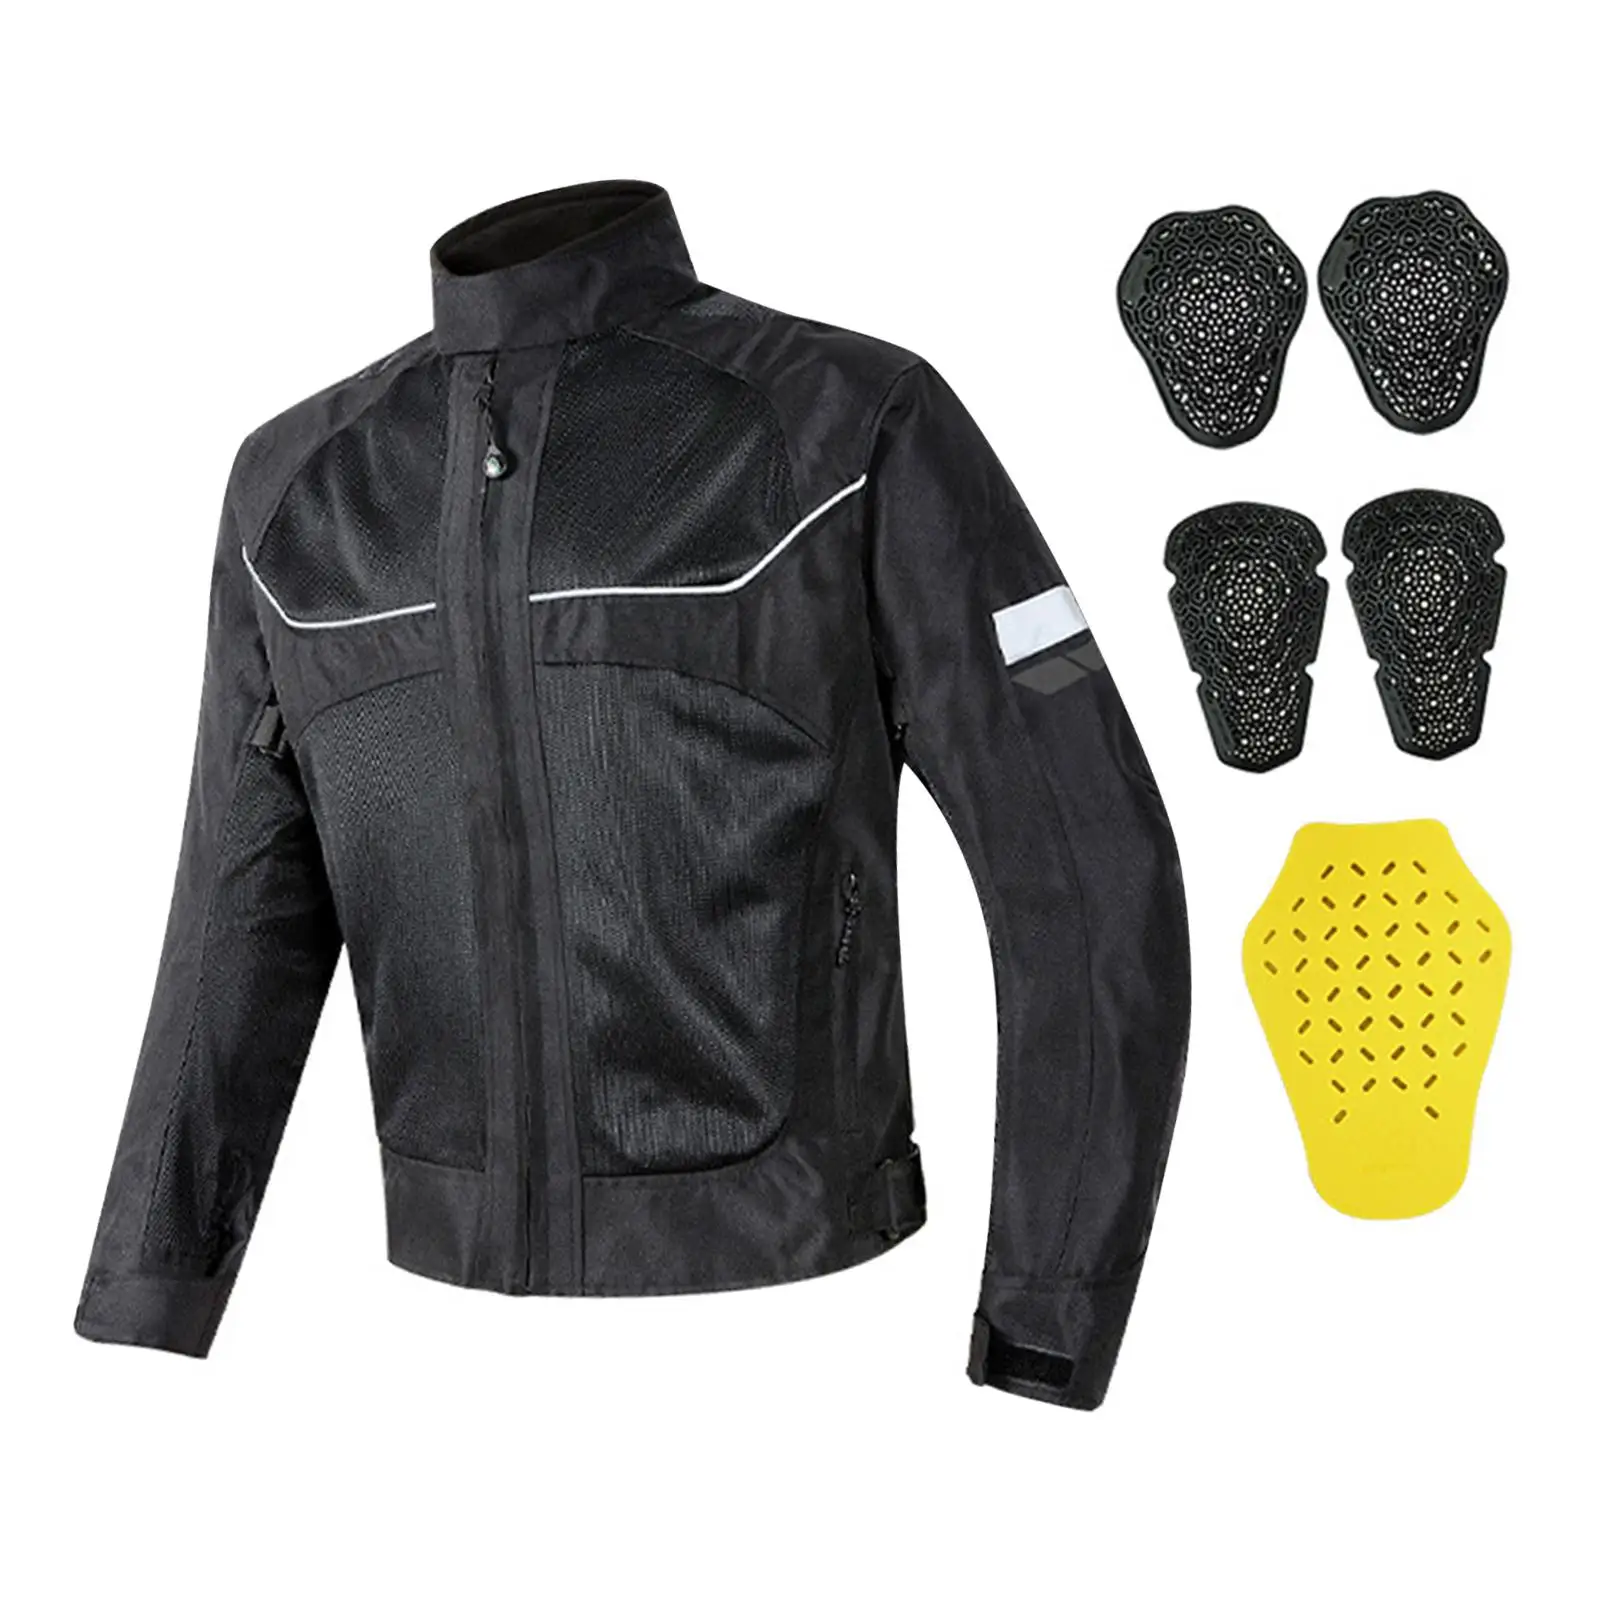 Motorcycle Riding Jacket, Protective Gear Coat Breathable Mesh Reflective